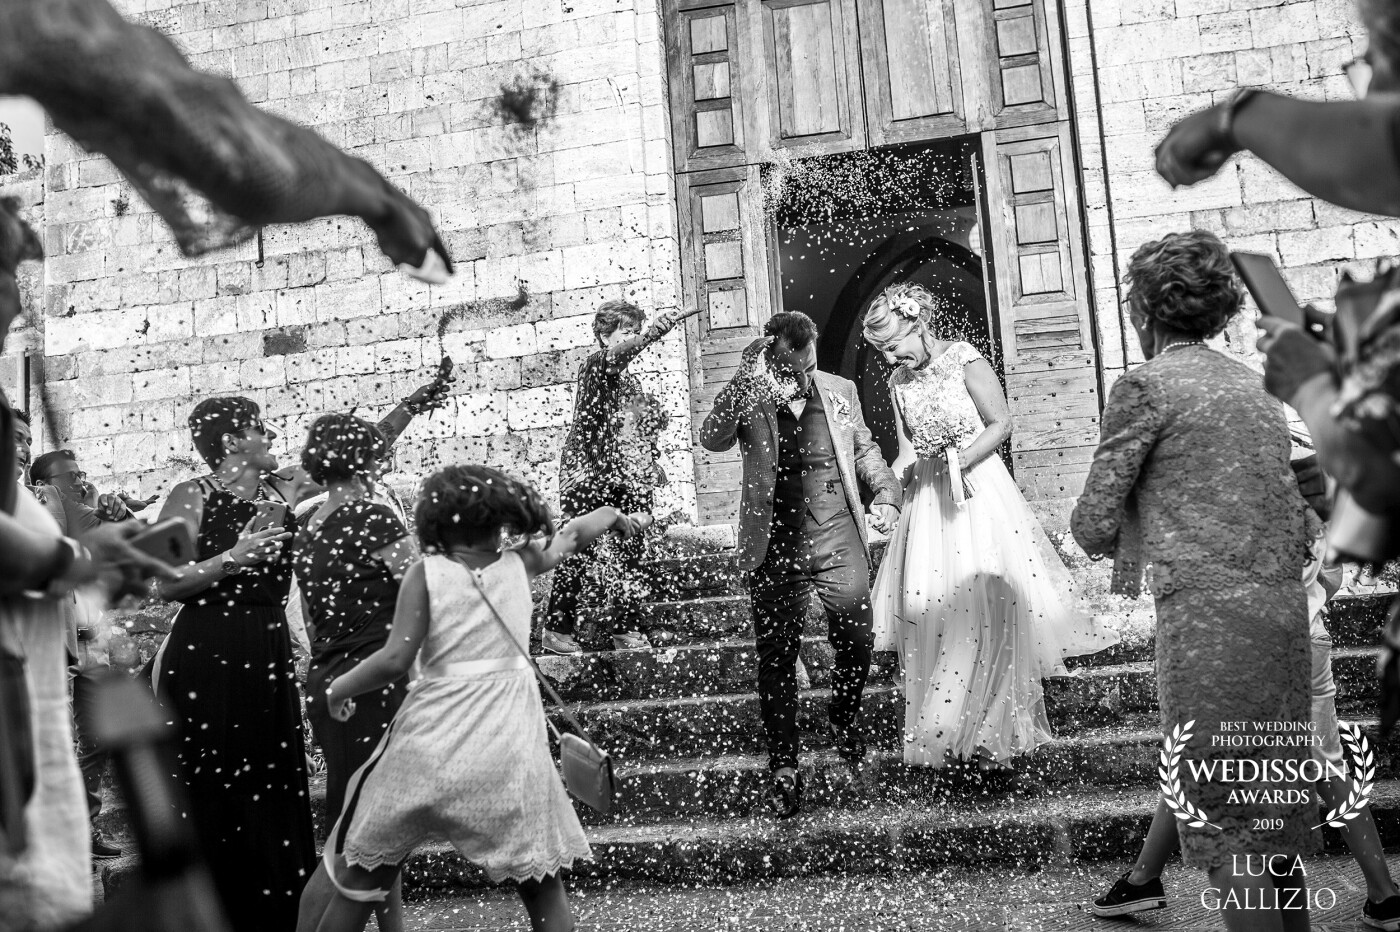 This picture was taken in the wedding of Giulia e Massimo in Tuscany, Italy.  It was a special wedding. They have found rice for all the day long. :)